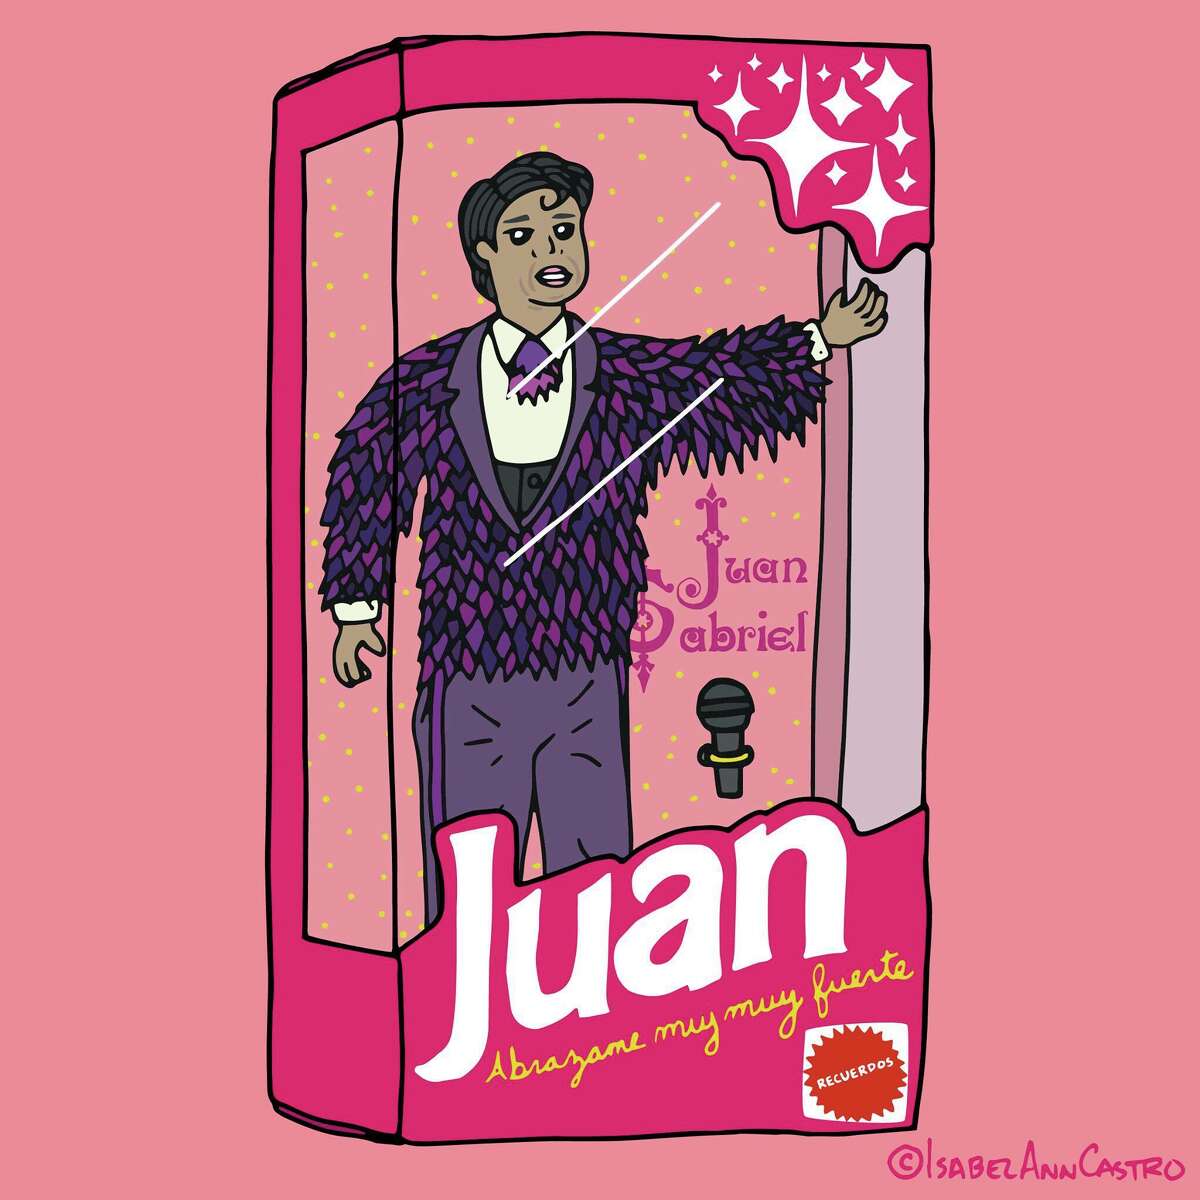 With the first ever San Anto Zine Fest set for October, festival organizers have planned a fundraiser night that simultaneously acts as a tribute to the late Mexican singer Juan Gabriel. The fundraiser will include a screening of Juan Gabriel's 1990 performance, En el Palacio de Bellas Artes; a performance by local drag kings Pancho Panza and SirGio; and a plethora of cumbia rhythms spun by DJ Heavyflow. All ages are welcome, and sequined attire à la Gabriel is encouraged. 7-10 p.m., The Movement Gallery/Galería de Movimiento, 1412 E Commerce St. $3 donation at the door, facebook.com/SanAntoZineFest -- Polly Anna Rocha